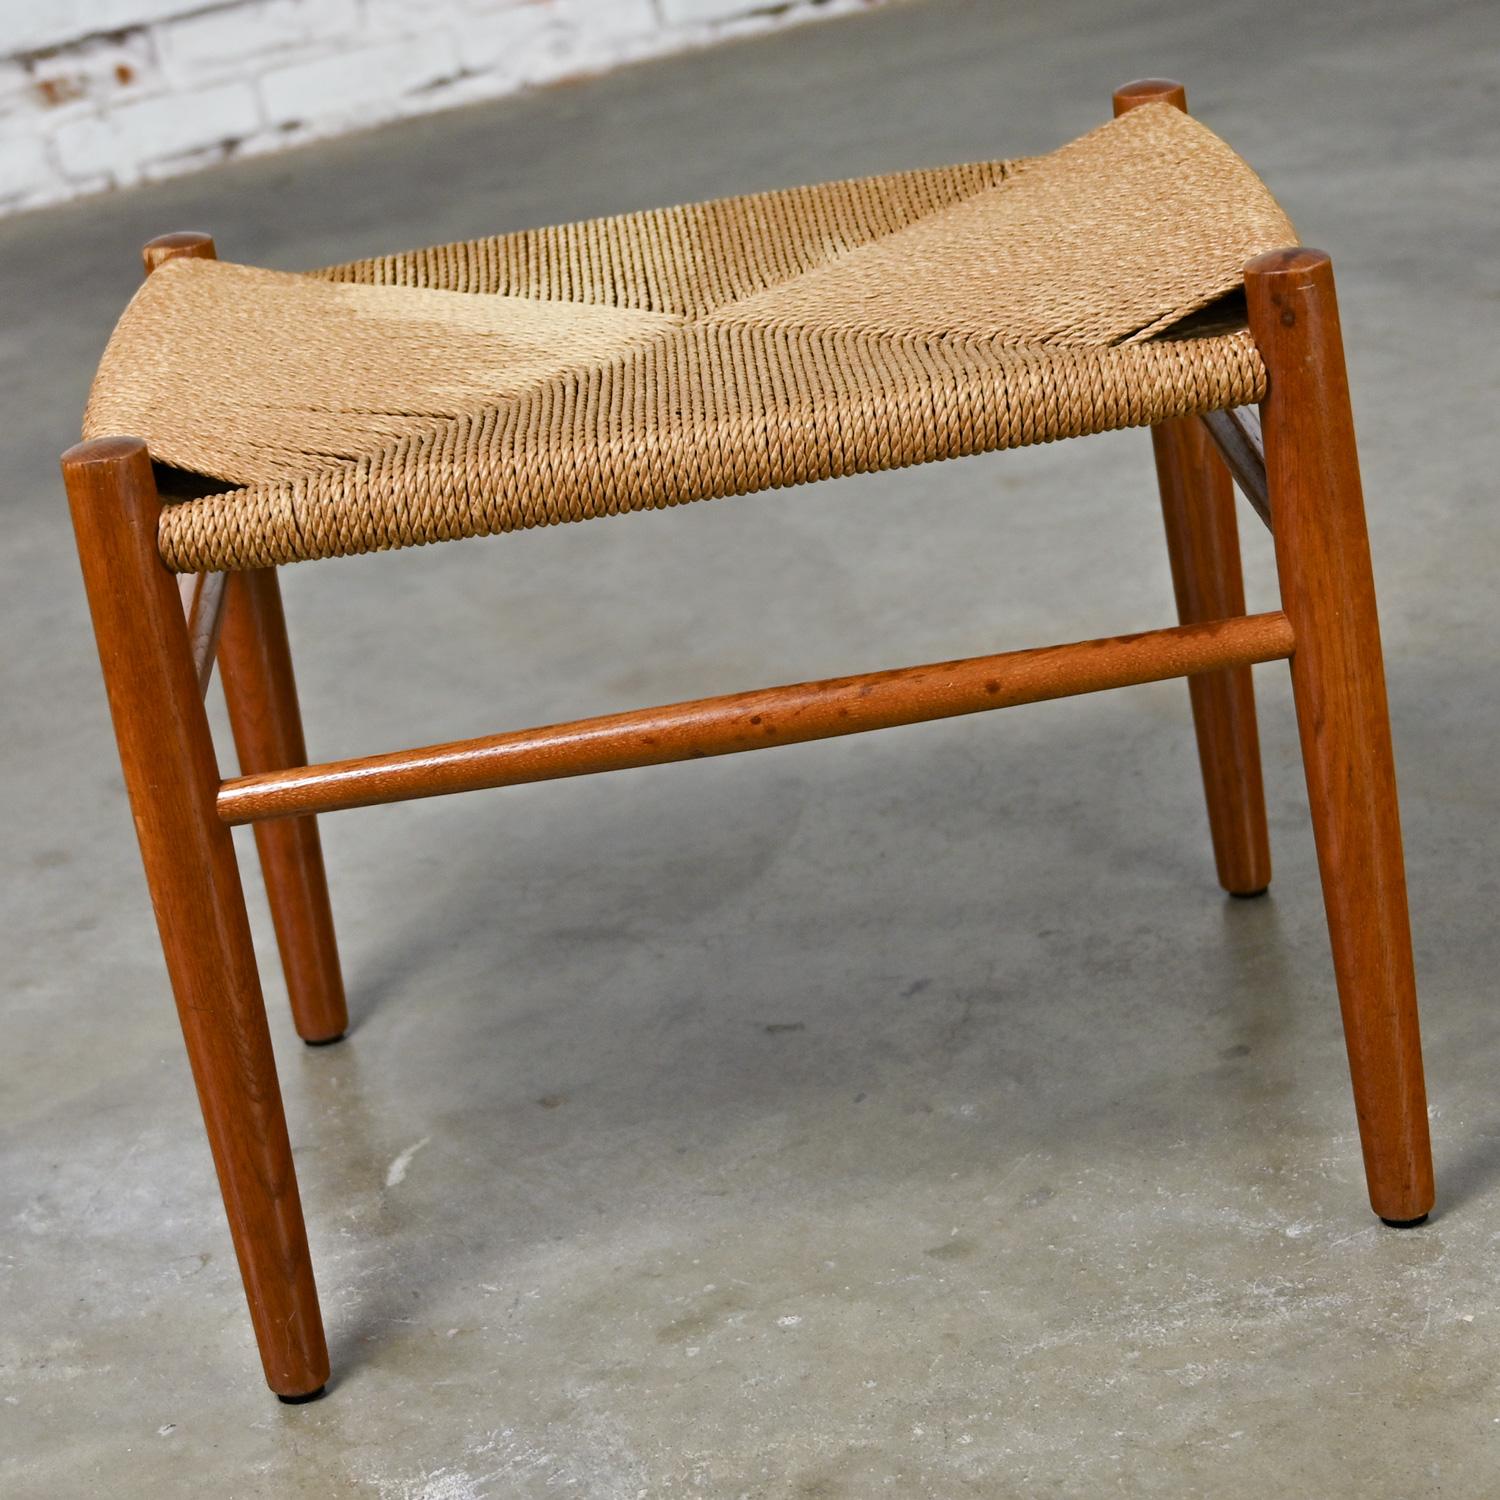 Fabulous Mid-20th Century Scandinavian Modern low stool comprised of a teak frame with a natural paper cord woven top. Beautiful condition, keeping in mind that this is vintage and not new so will have signs of use and wear. There is a bleach spot